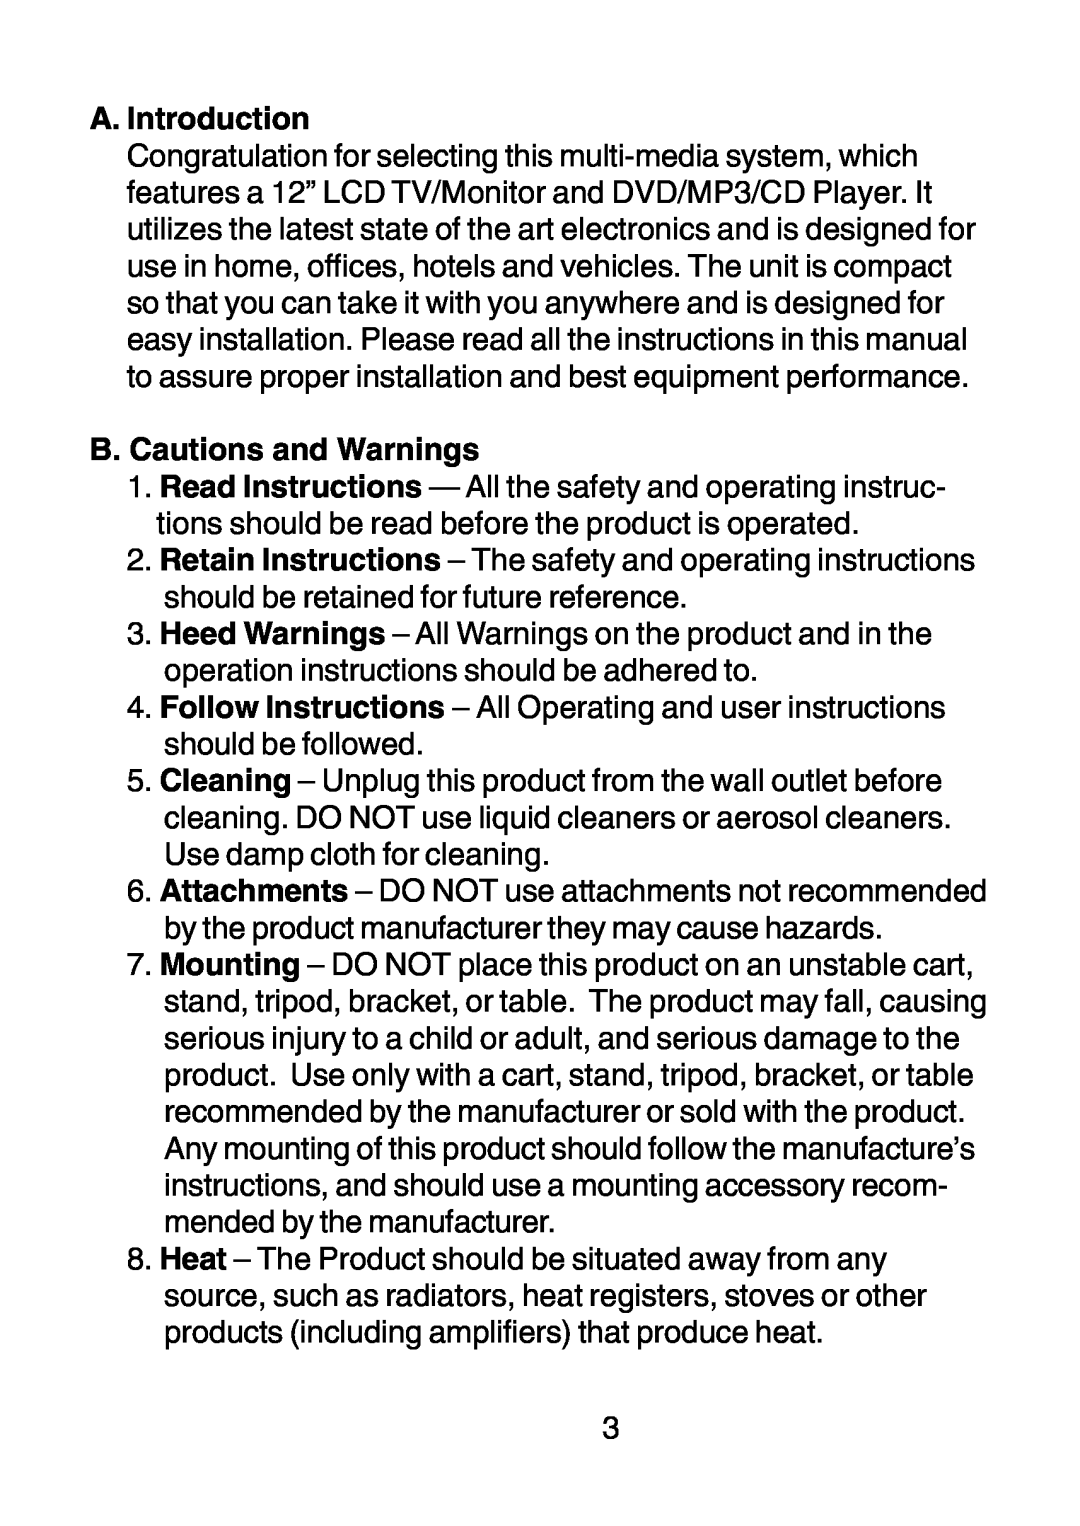 Audiovox D1210 owner manual A. Introduction, B. Cautions and Warnings 